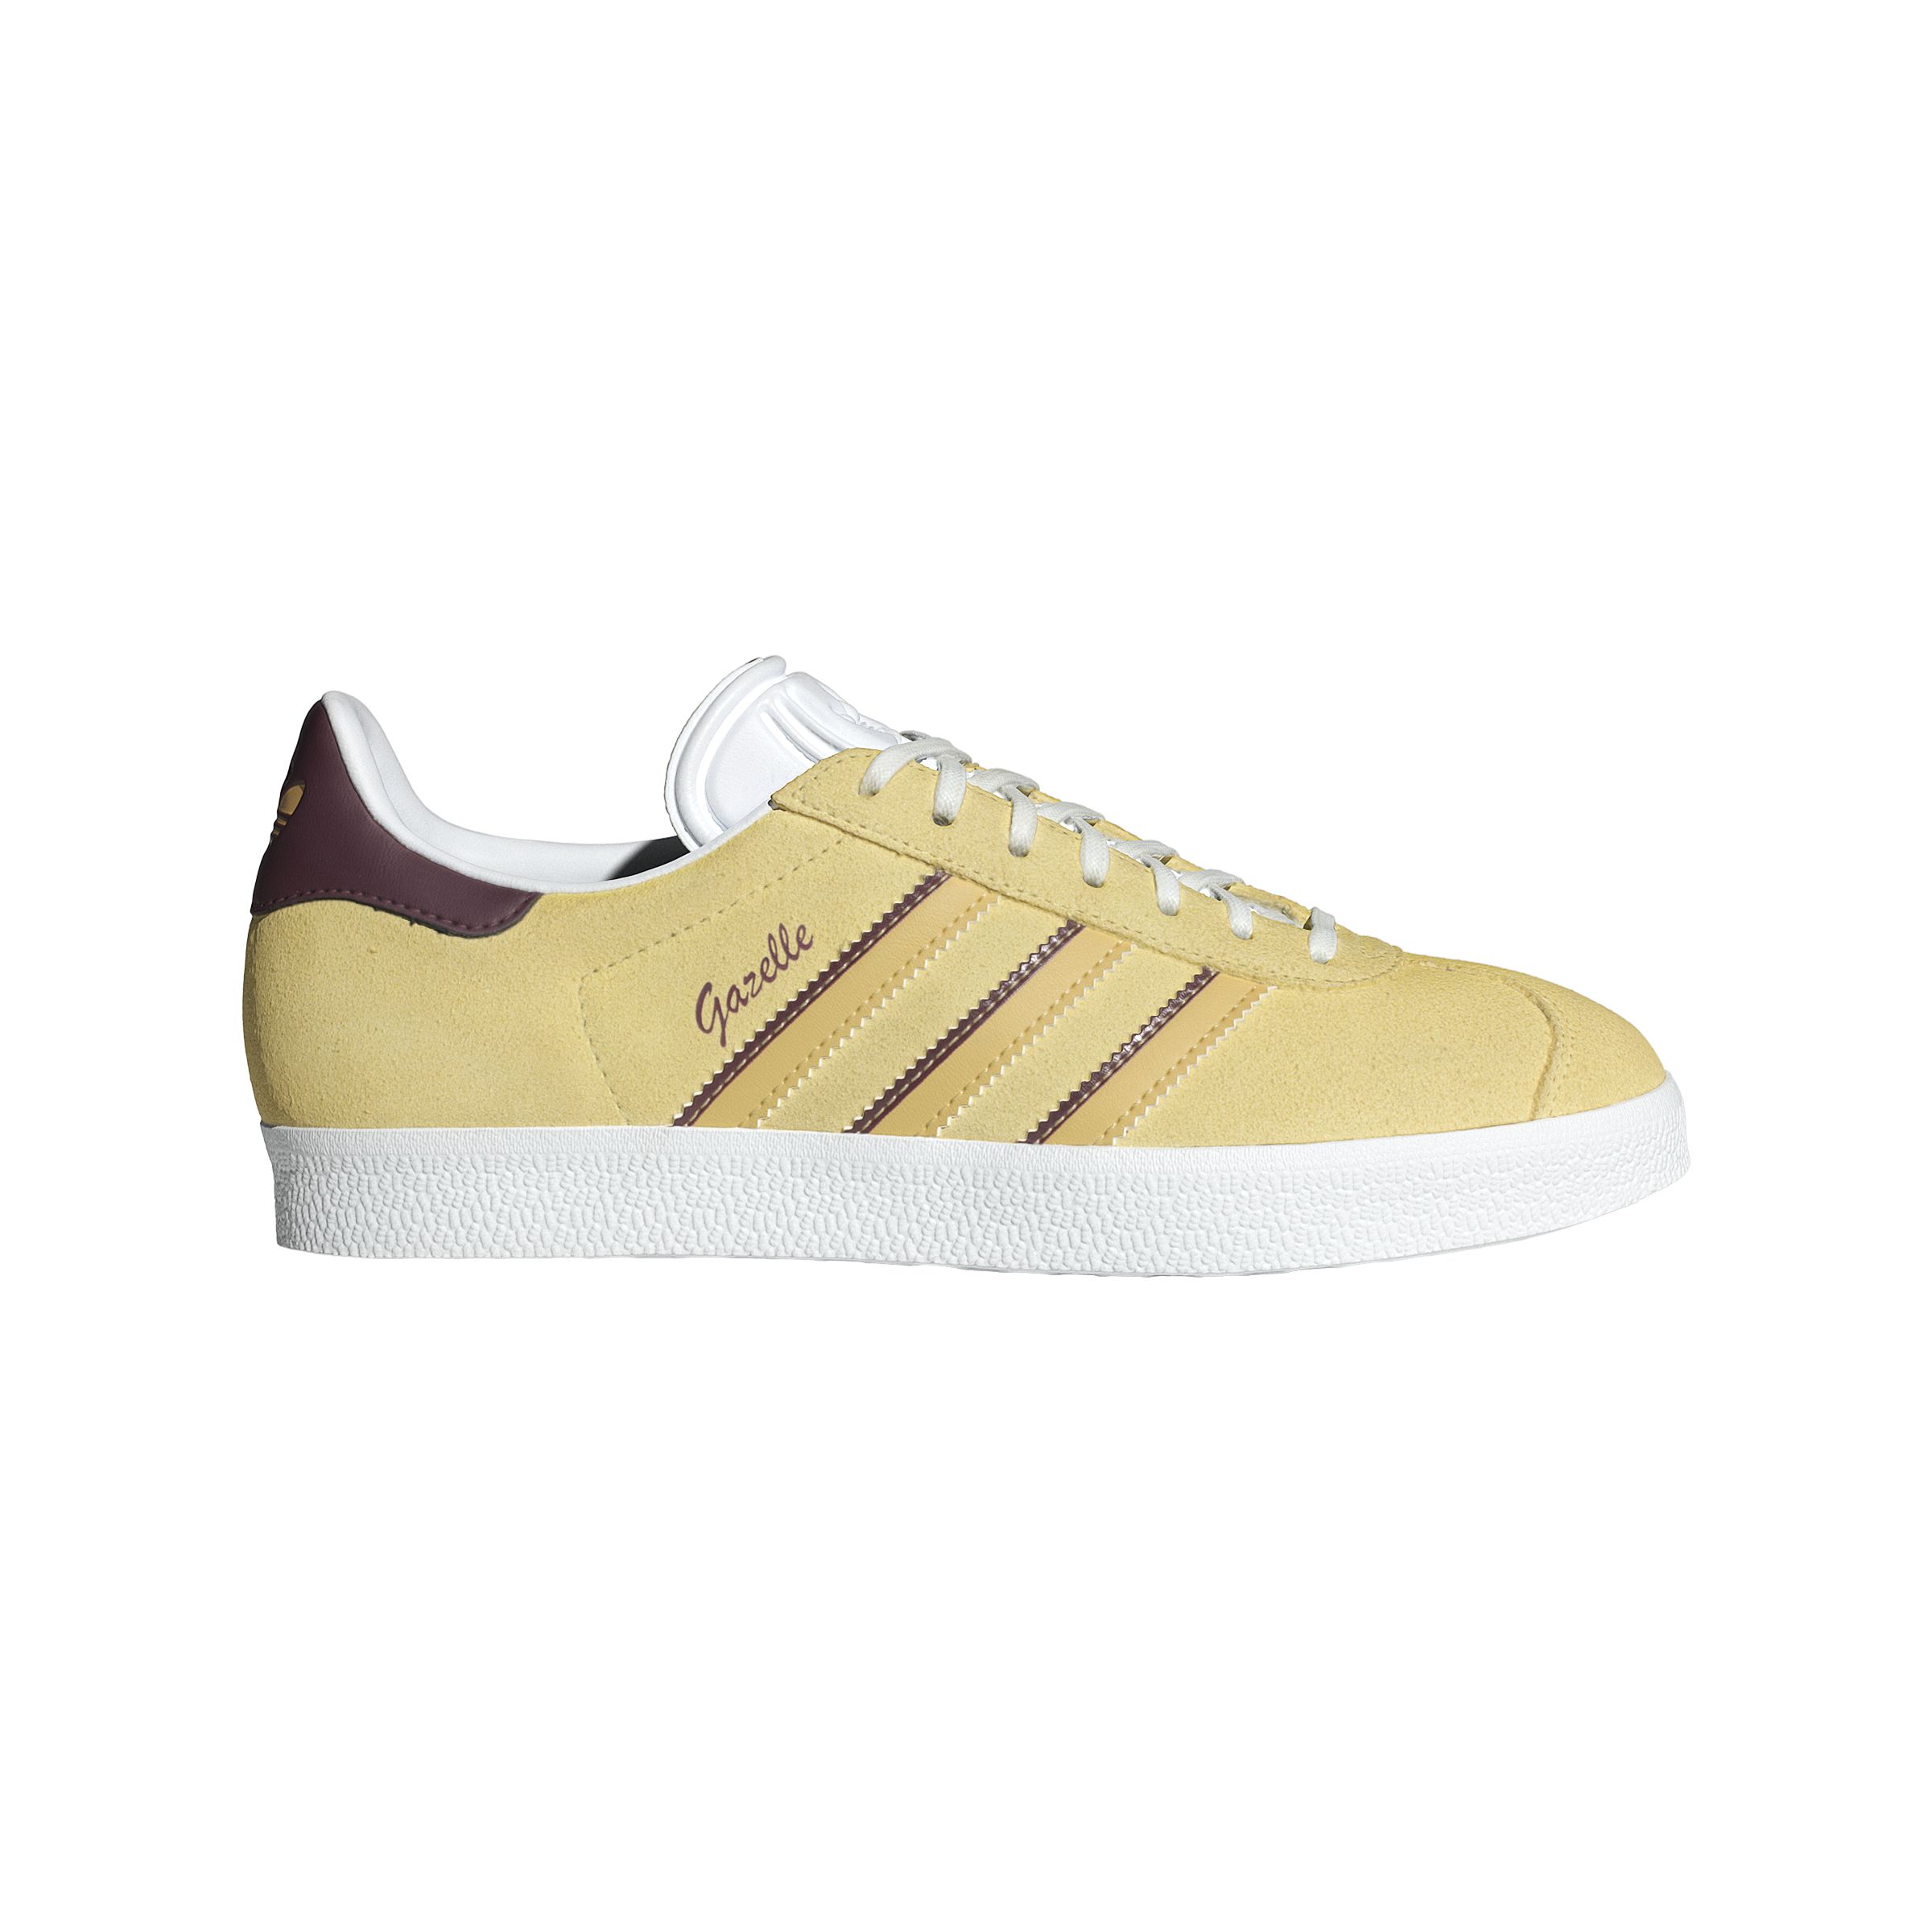 Image of adidas Women's Gazelle Shoes Sneakers